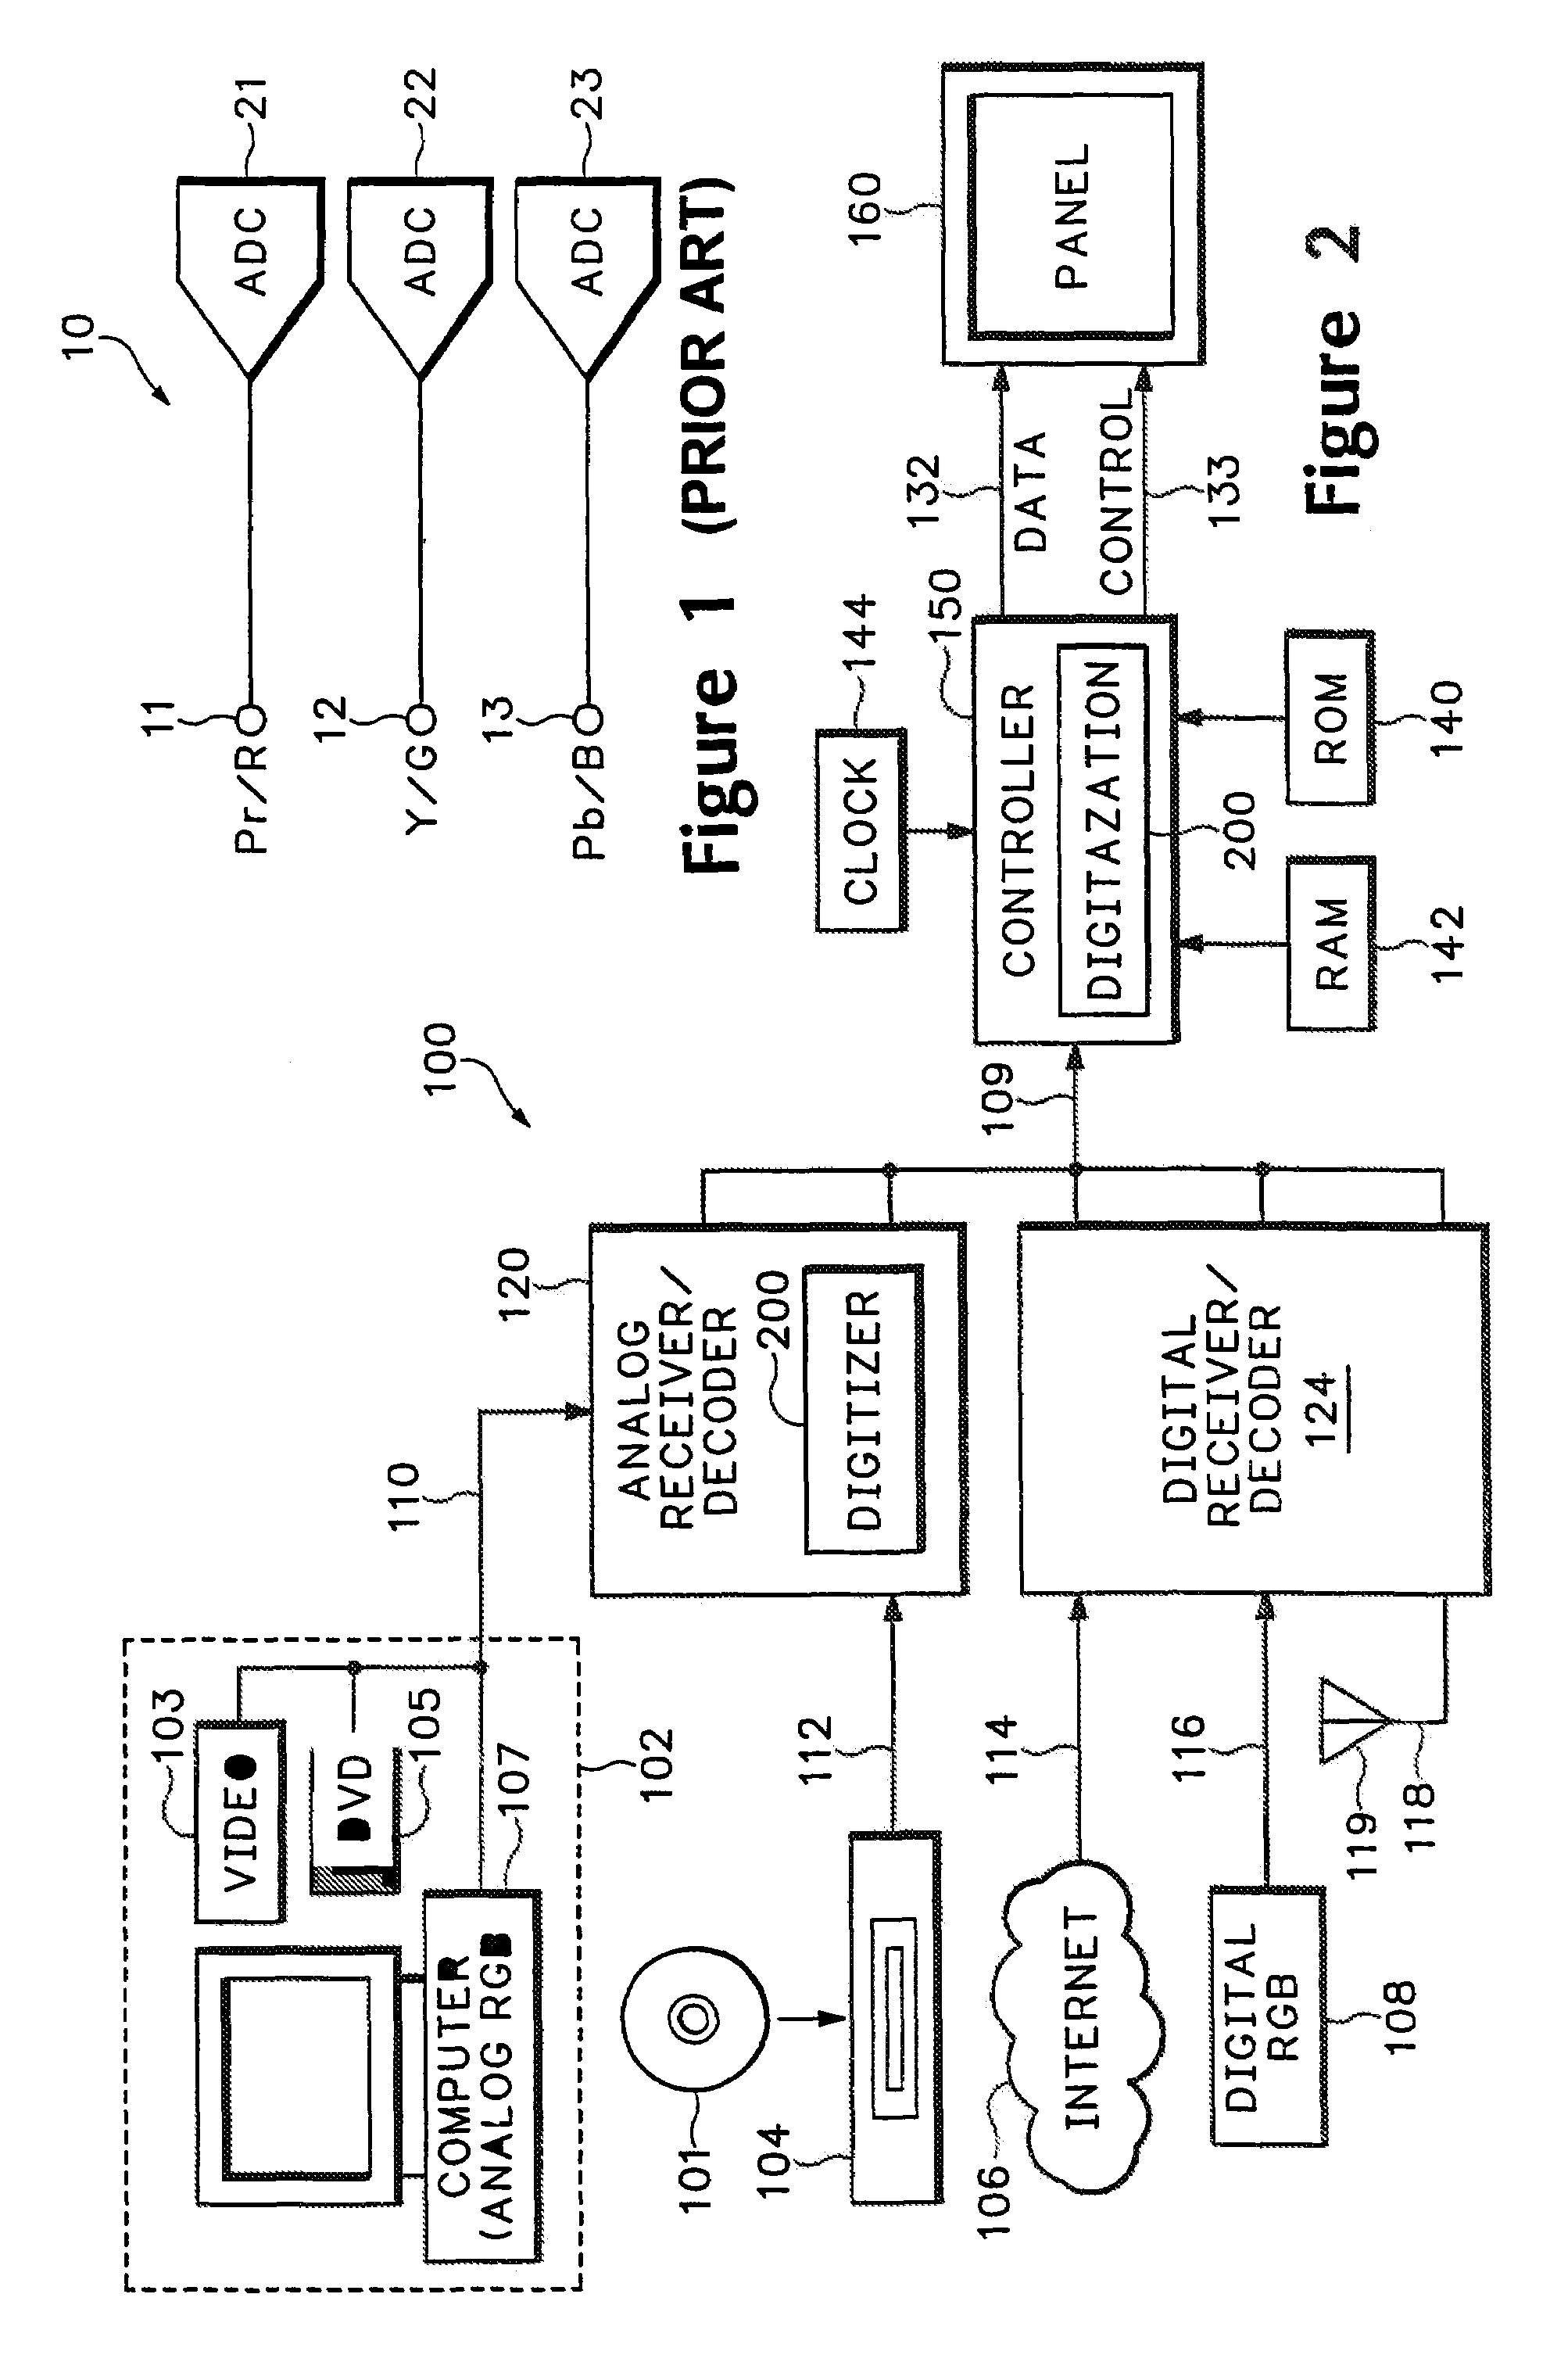 Multiplexed video digitization system and method